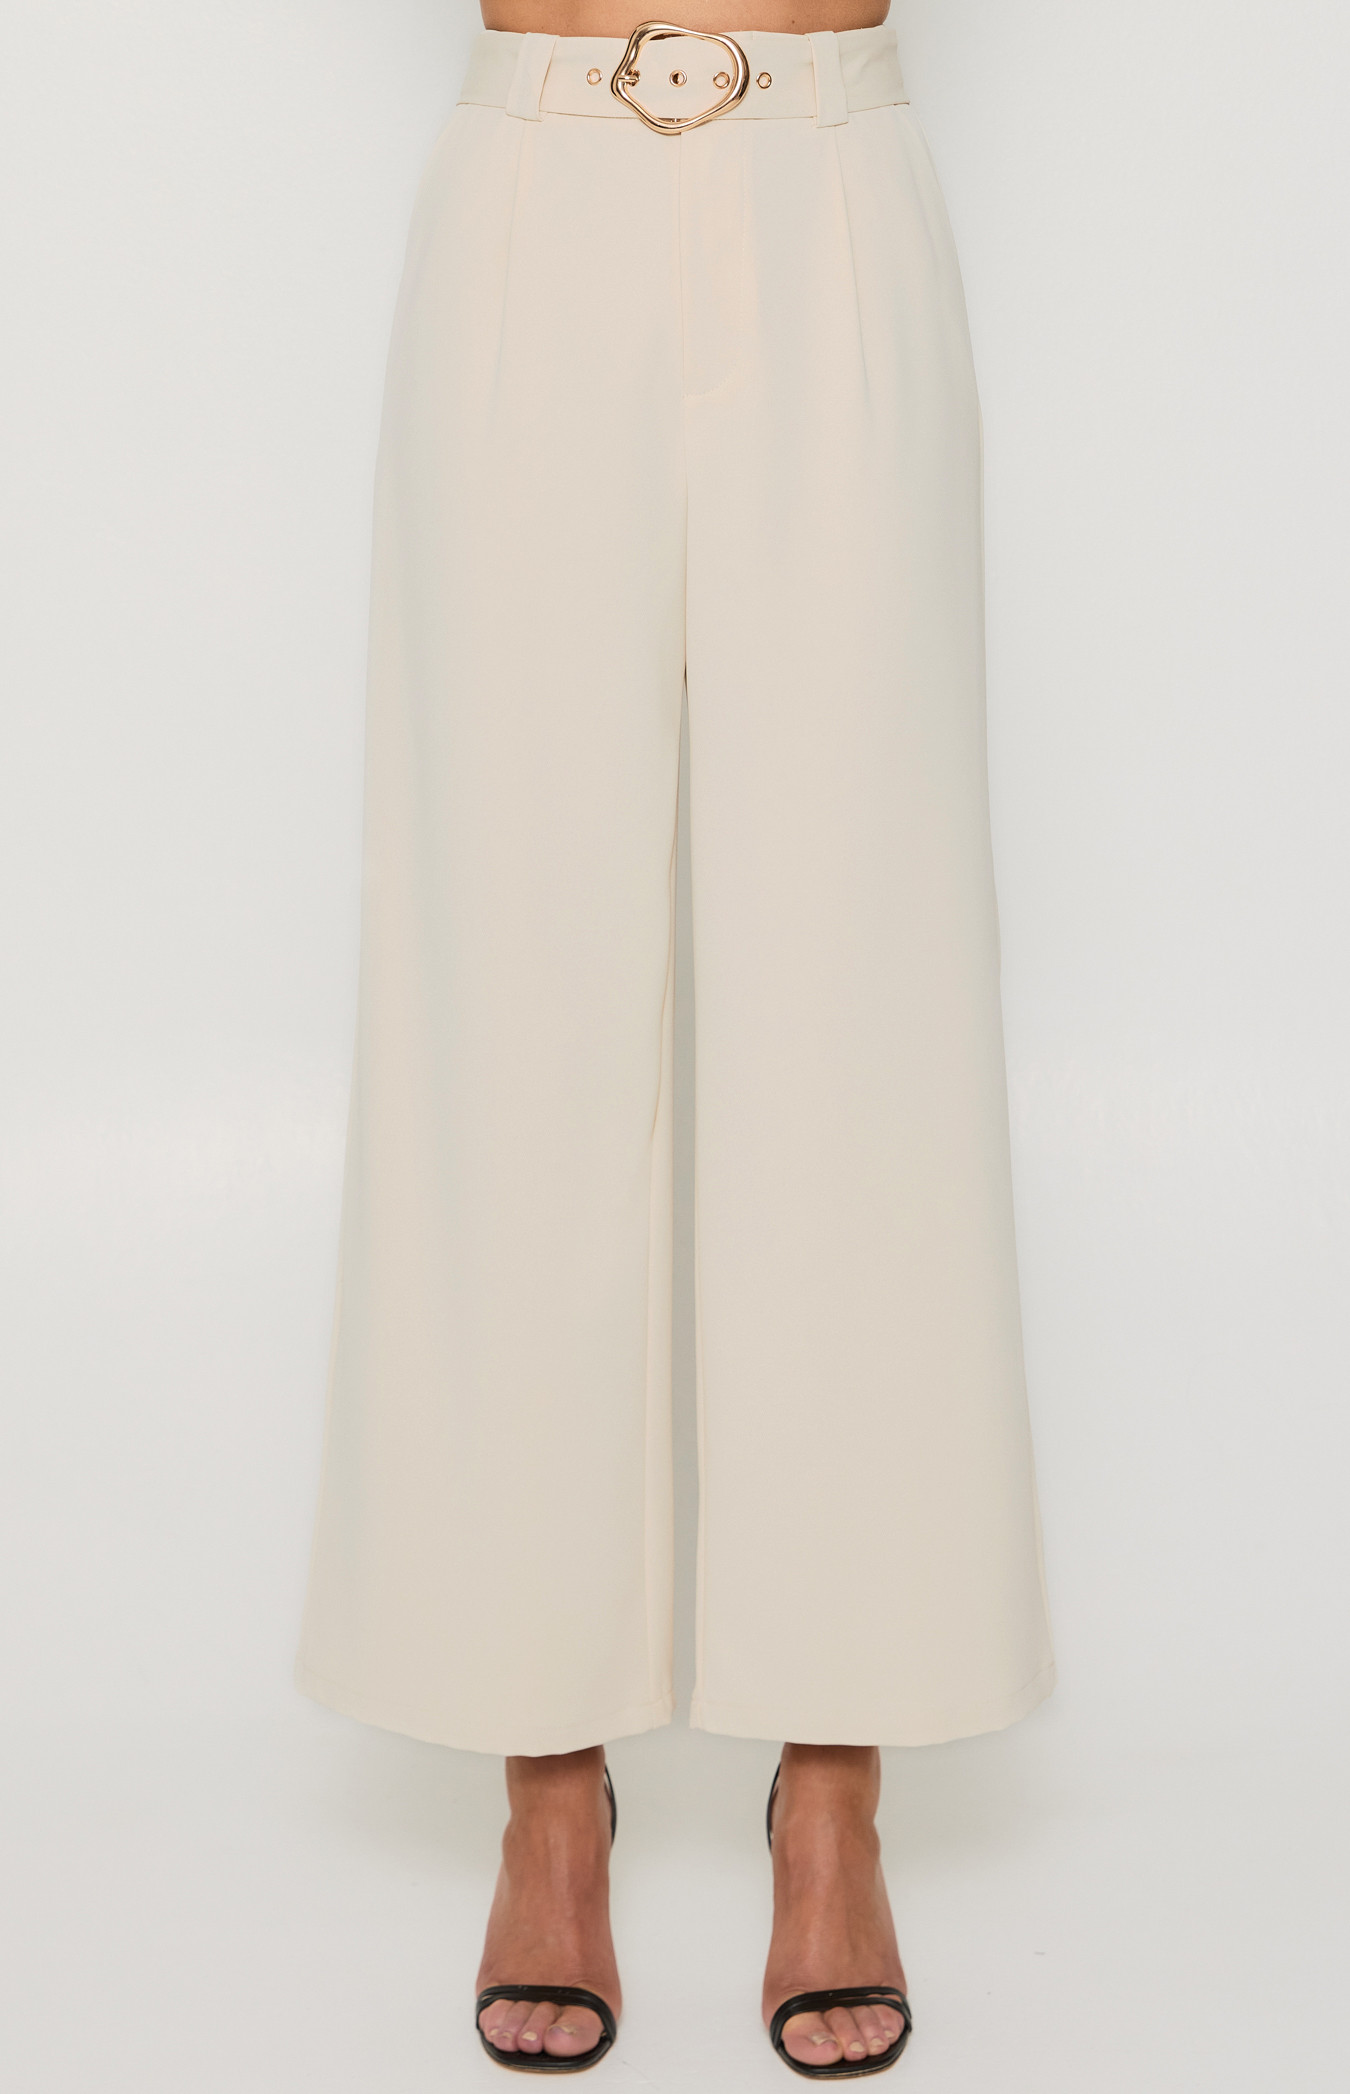 High Waisted Pants with Gold Belt Buckle Feature (SPA453) | Style State